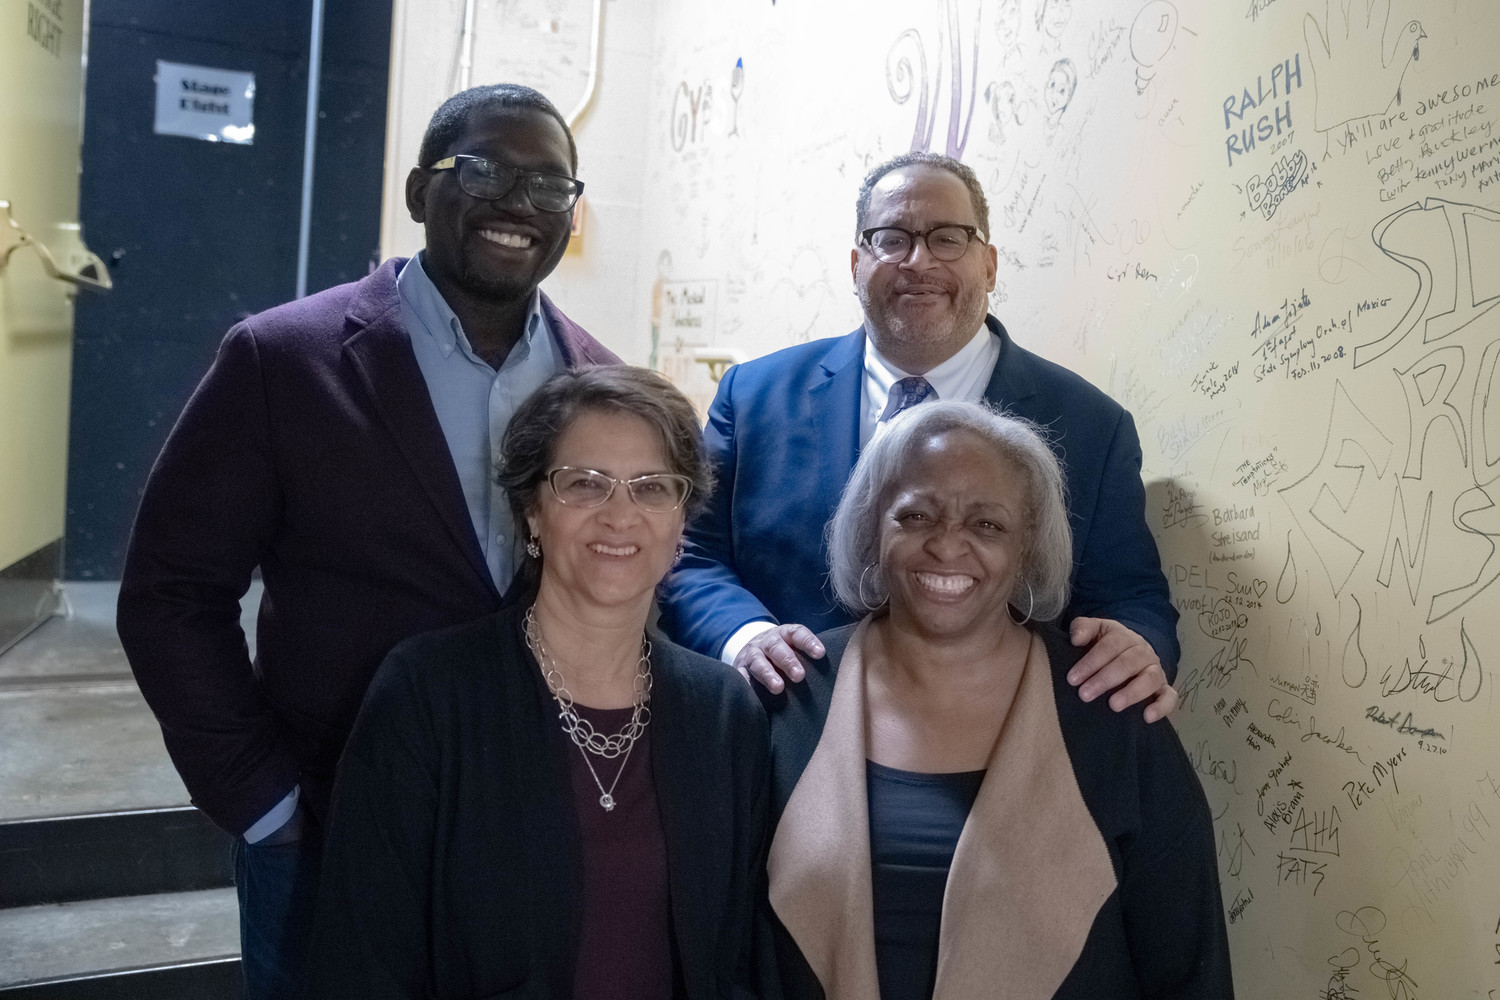 From top left, clockwise: Jamelle Bouie, Michael Eric Dyson, Carol Anderson, and Martha S. Jones backstage at The Paramount Theater before All of Our Rights during the 2019 Virginia Festival of the Book.